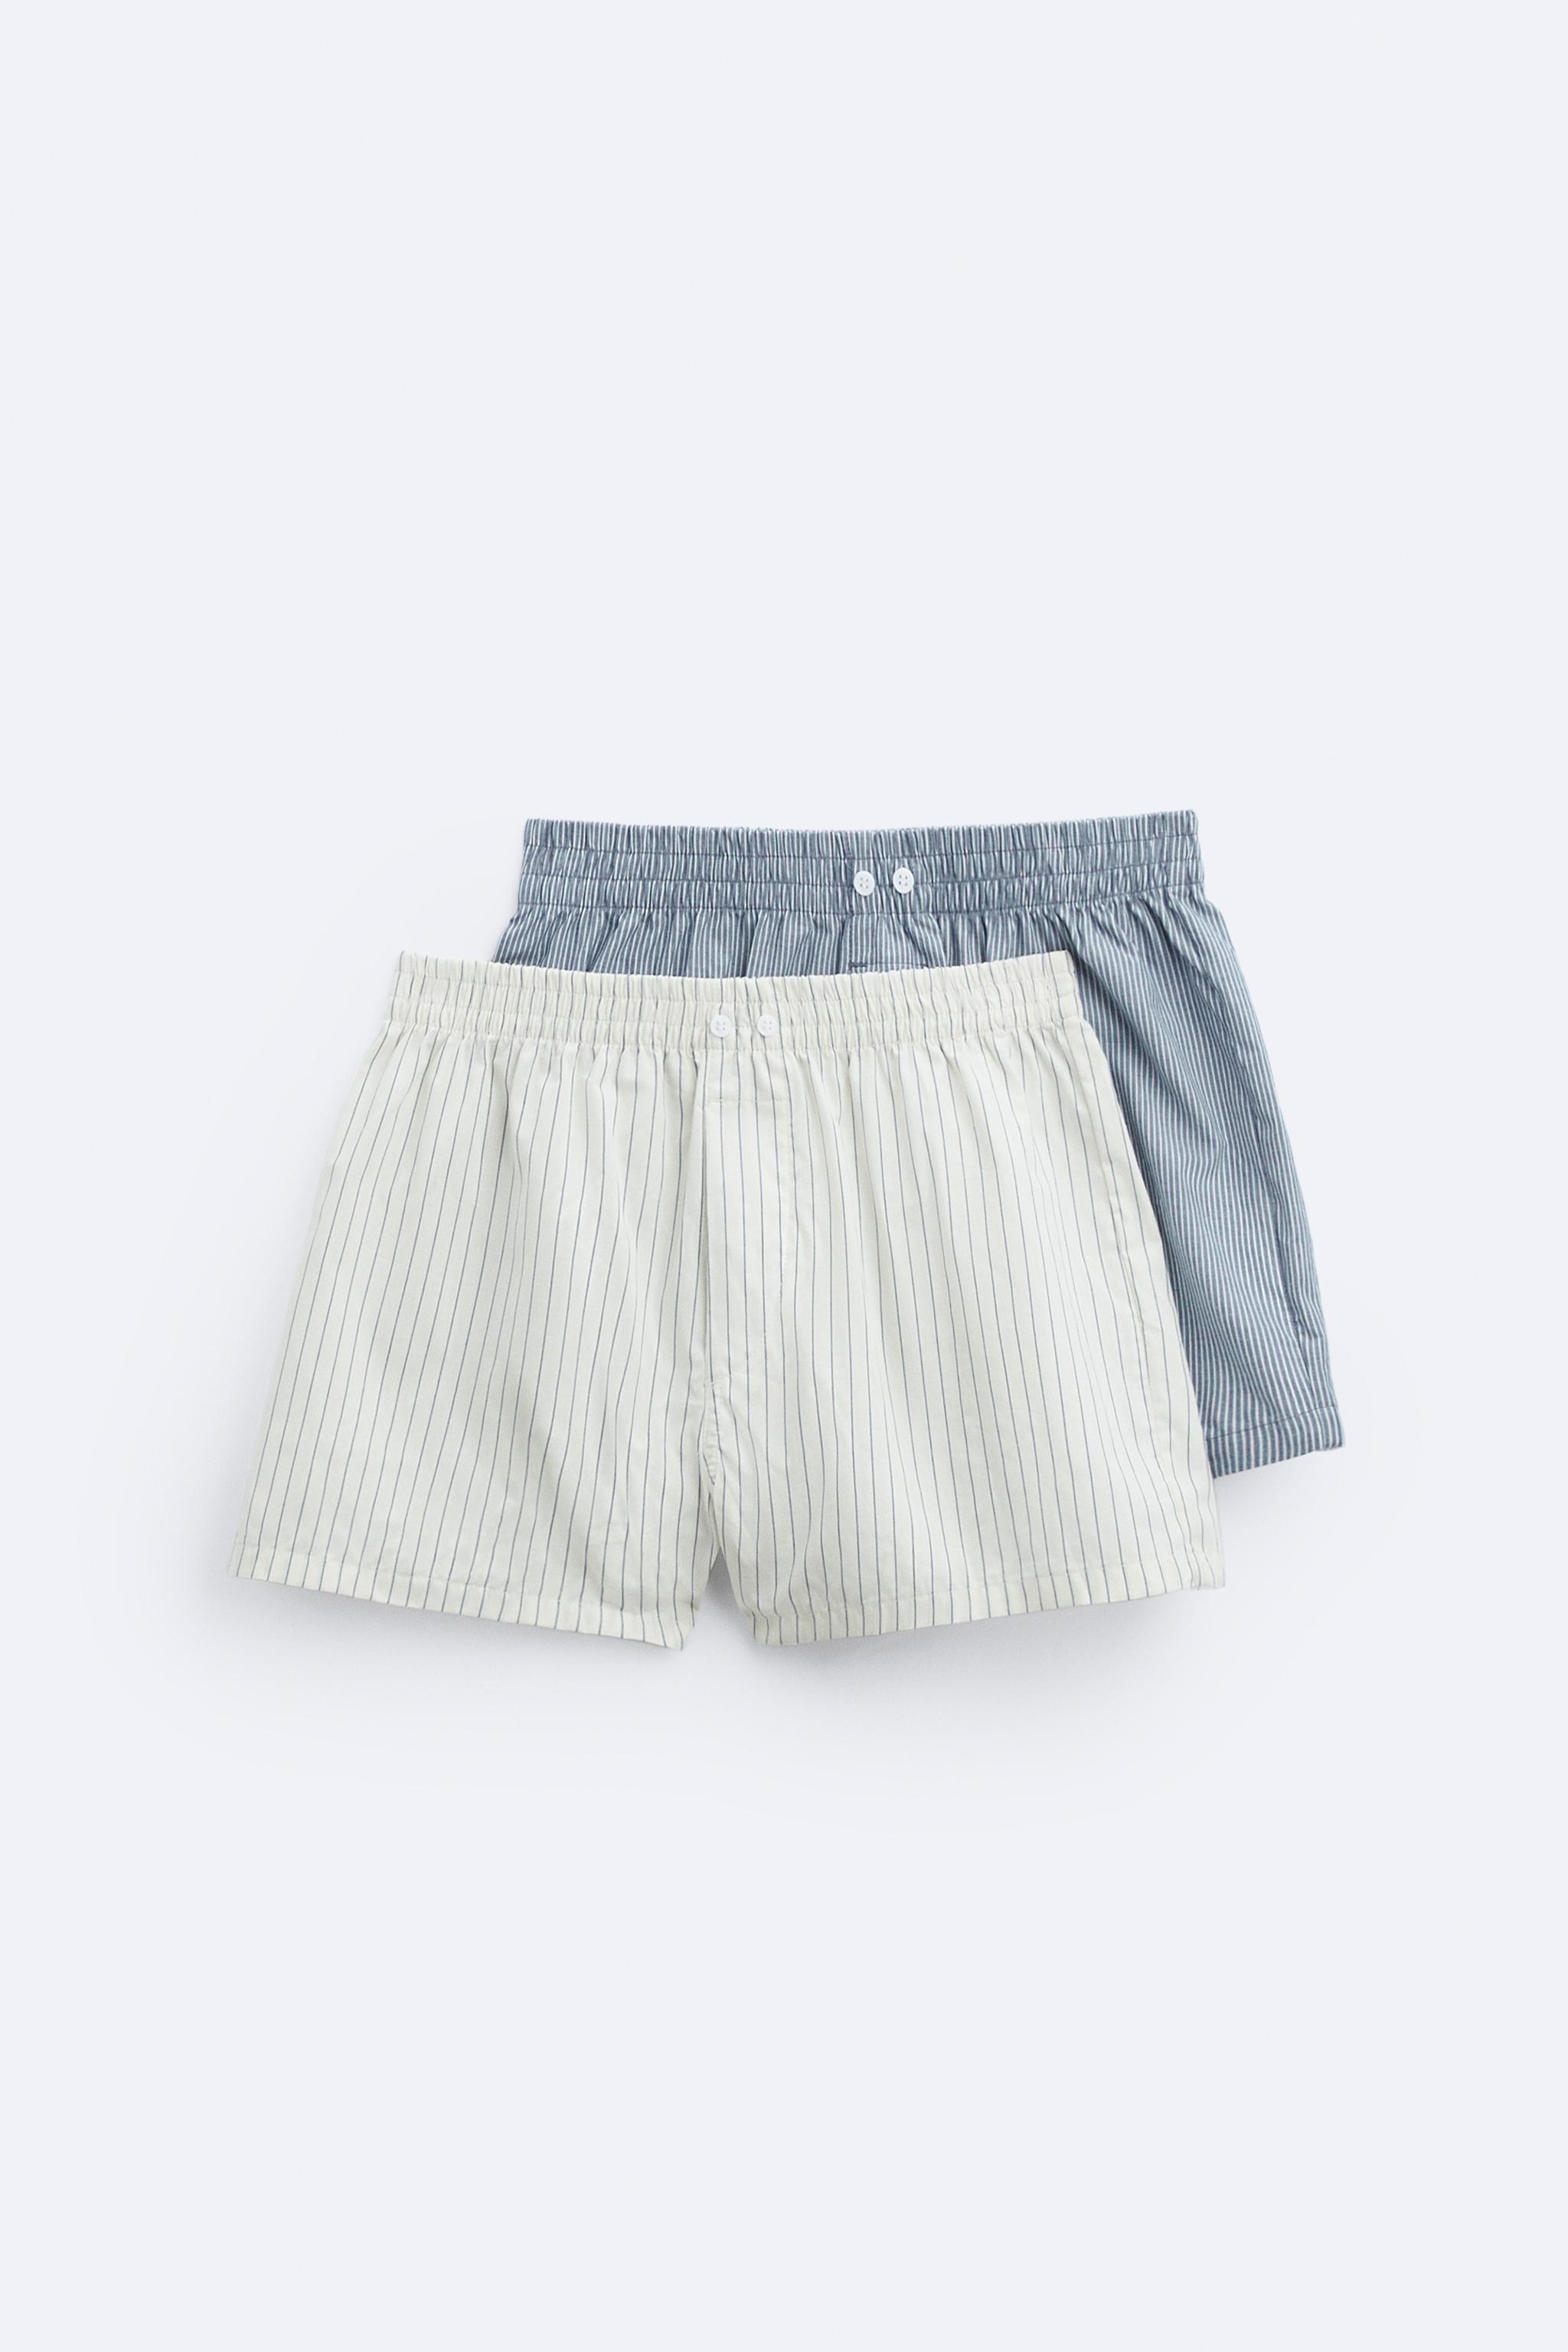 Zara 3 PACK OF COMBINATION BOXERS